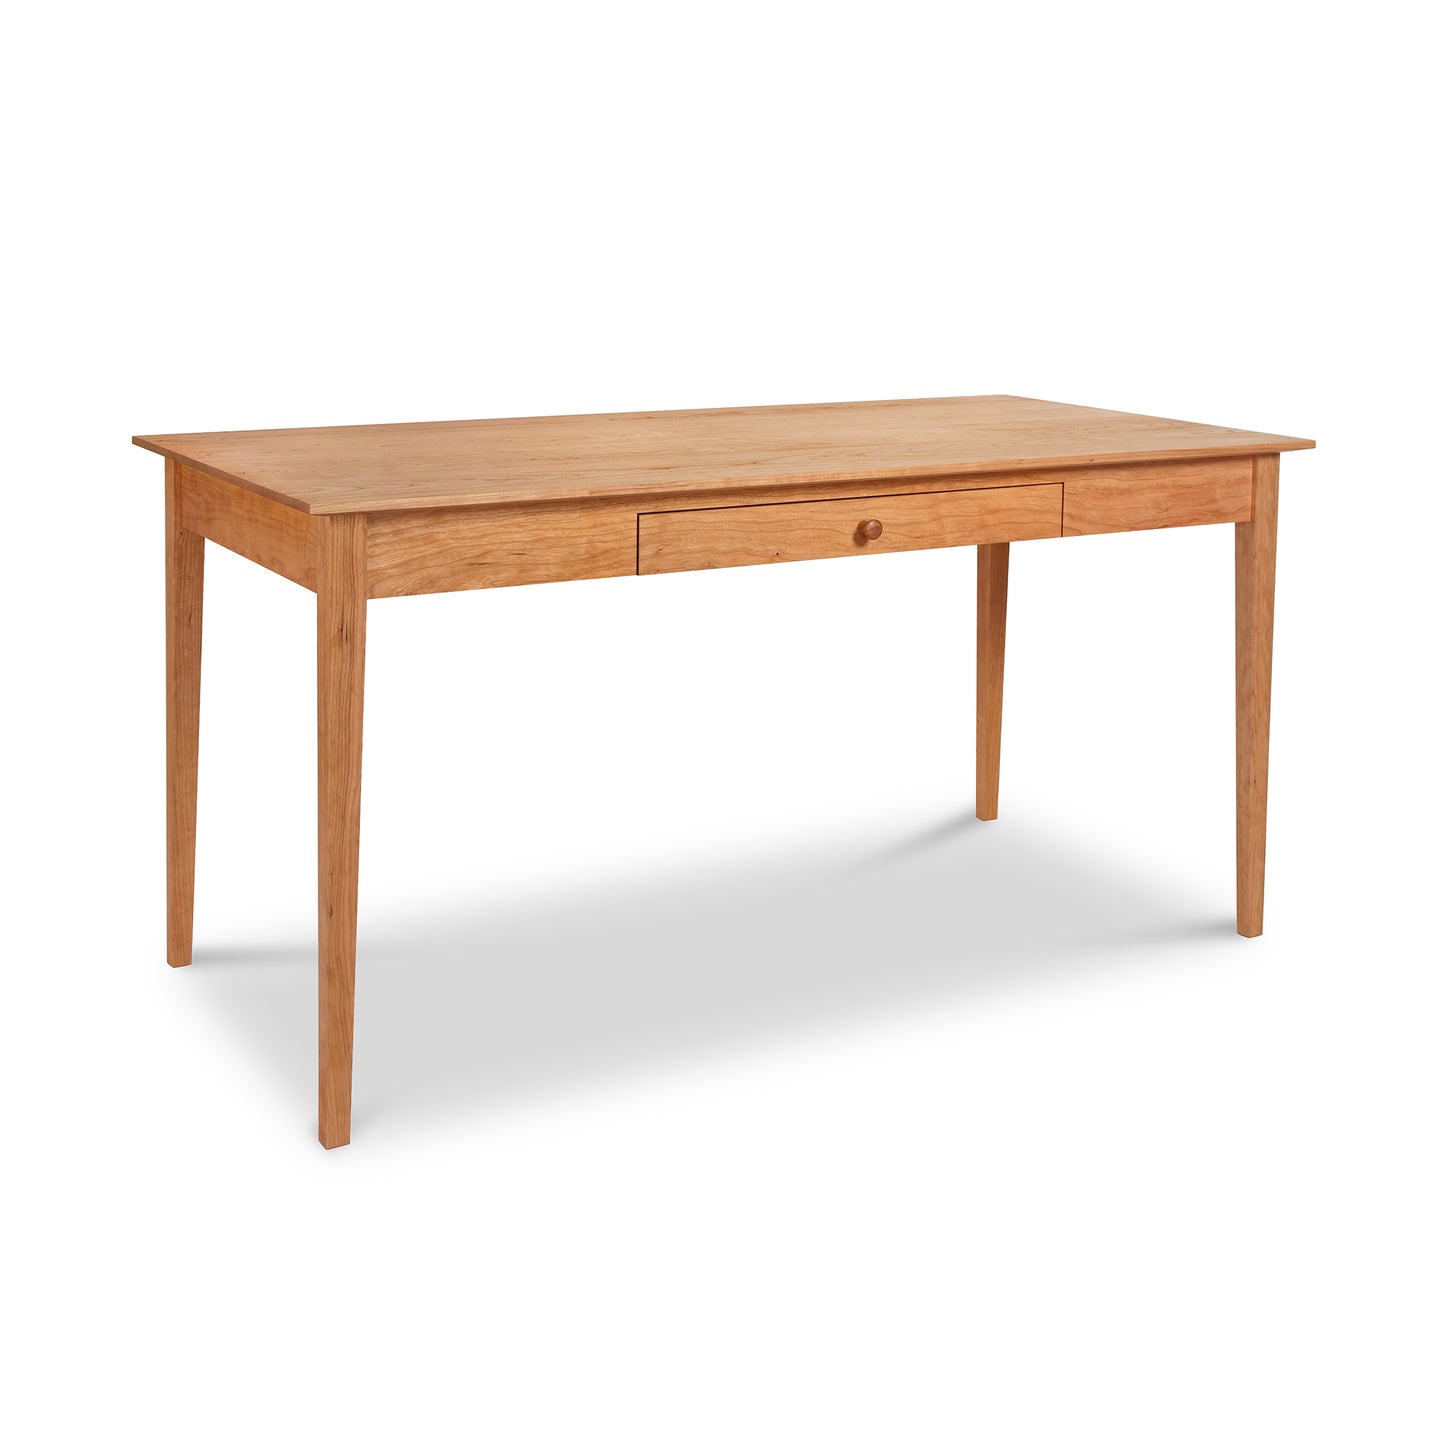 Maple Corner Woodworks American Shaker Writing Desk with a single central drawer, set against a white background.